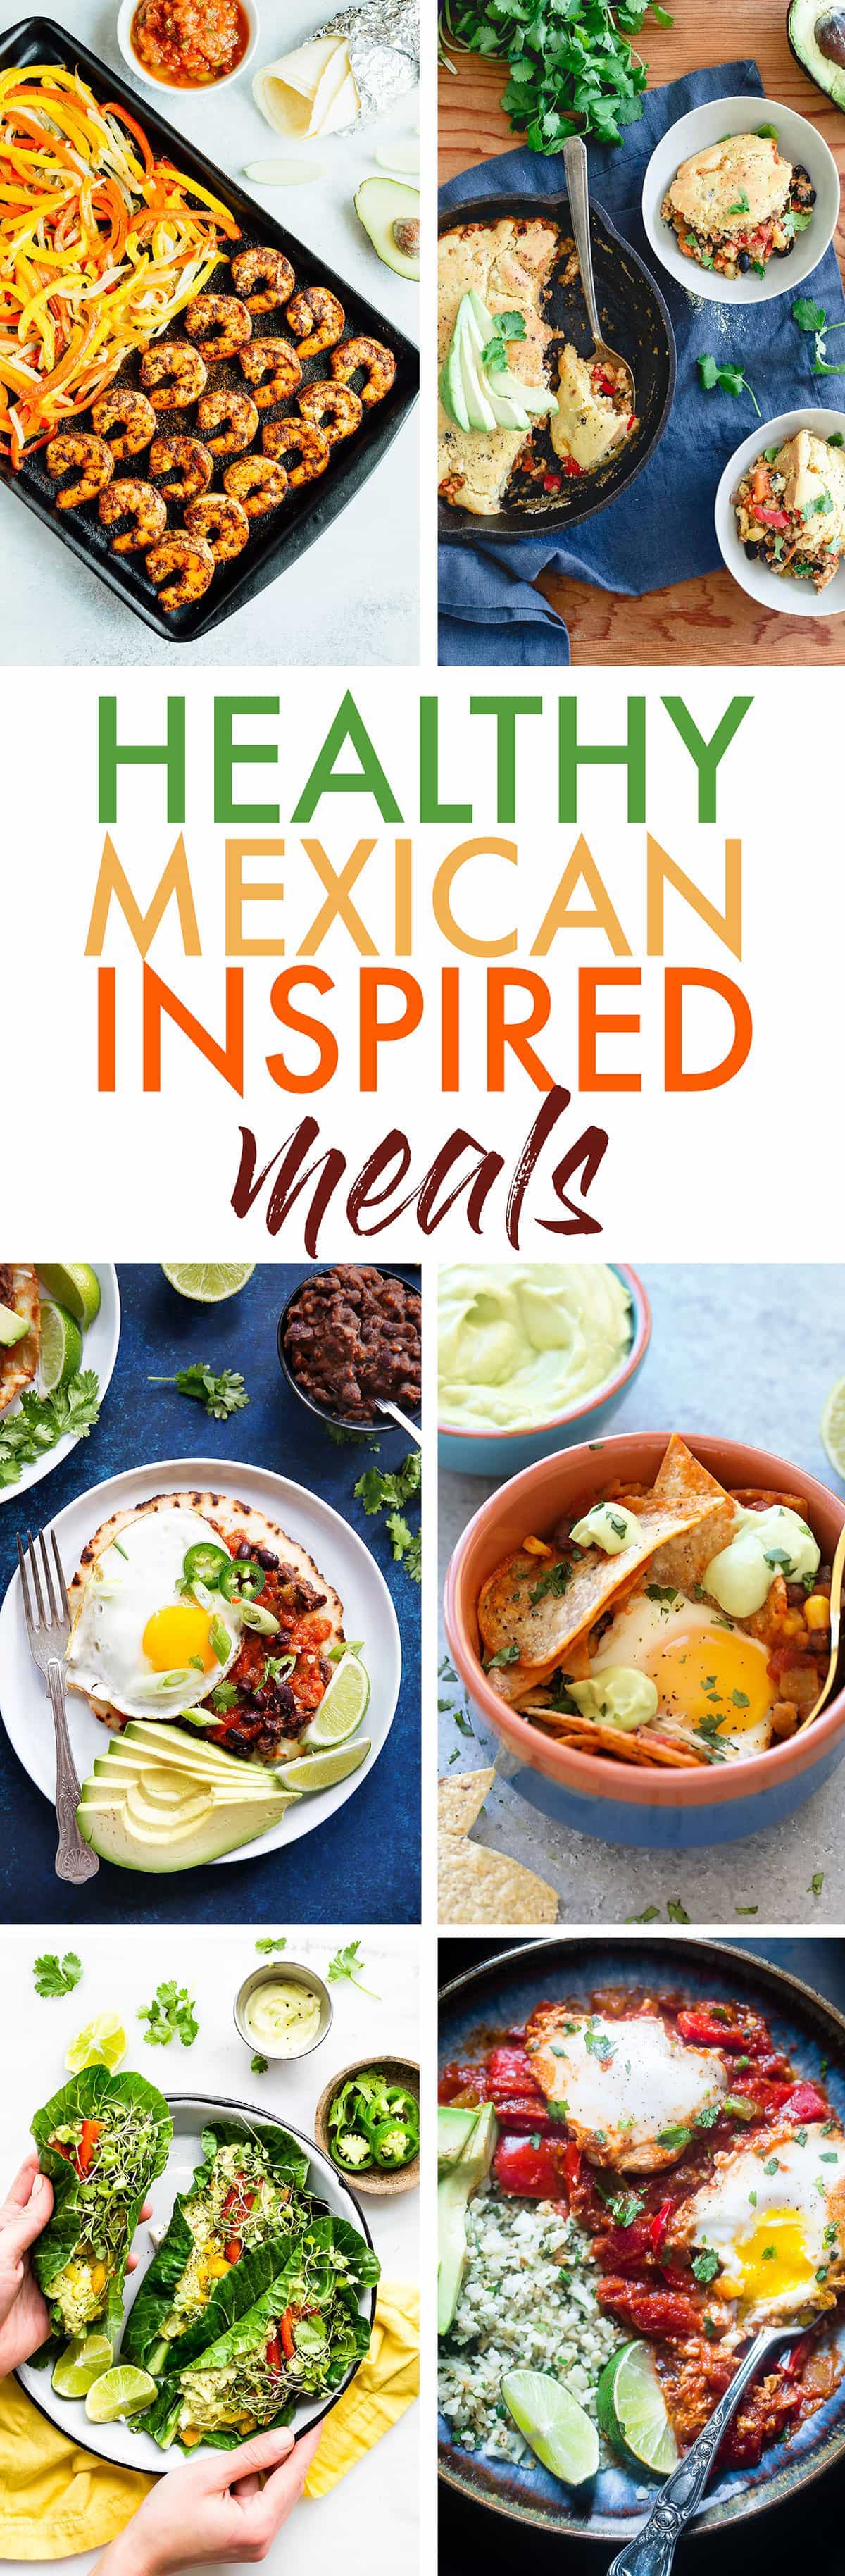 Whole30 Mexican Shakshuka - This quick and easy, gluten free Shakshuka recipe has a little, spicy Mexican twist! It's a lower carb, healthy and paleo friendly dinner or breakfast! | Foodfaithfitness.com | @FoodFaithFit